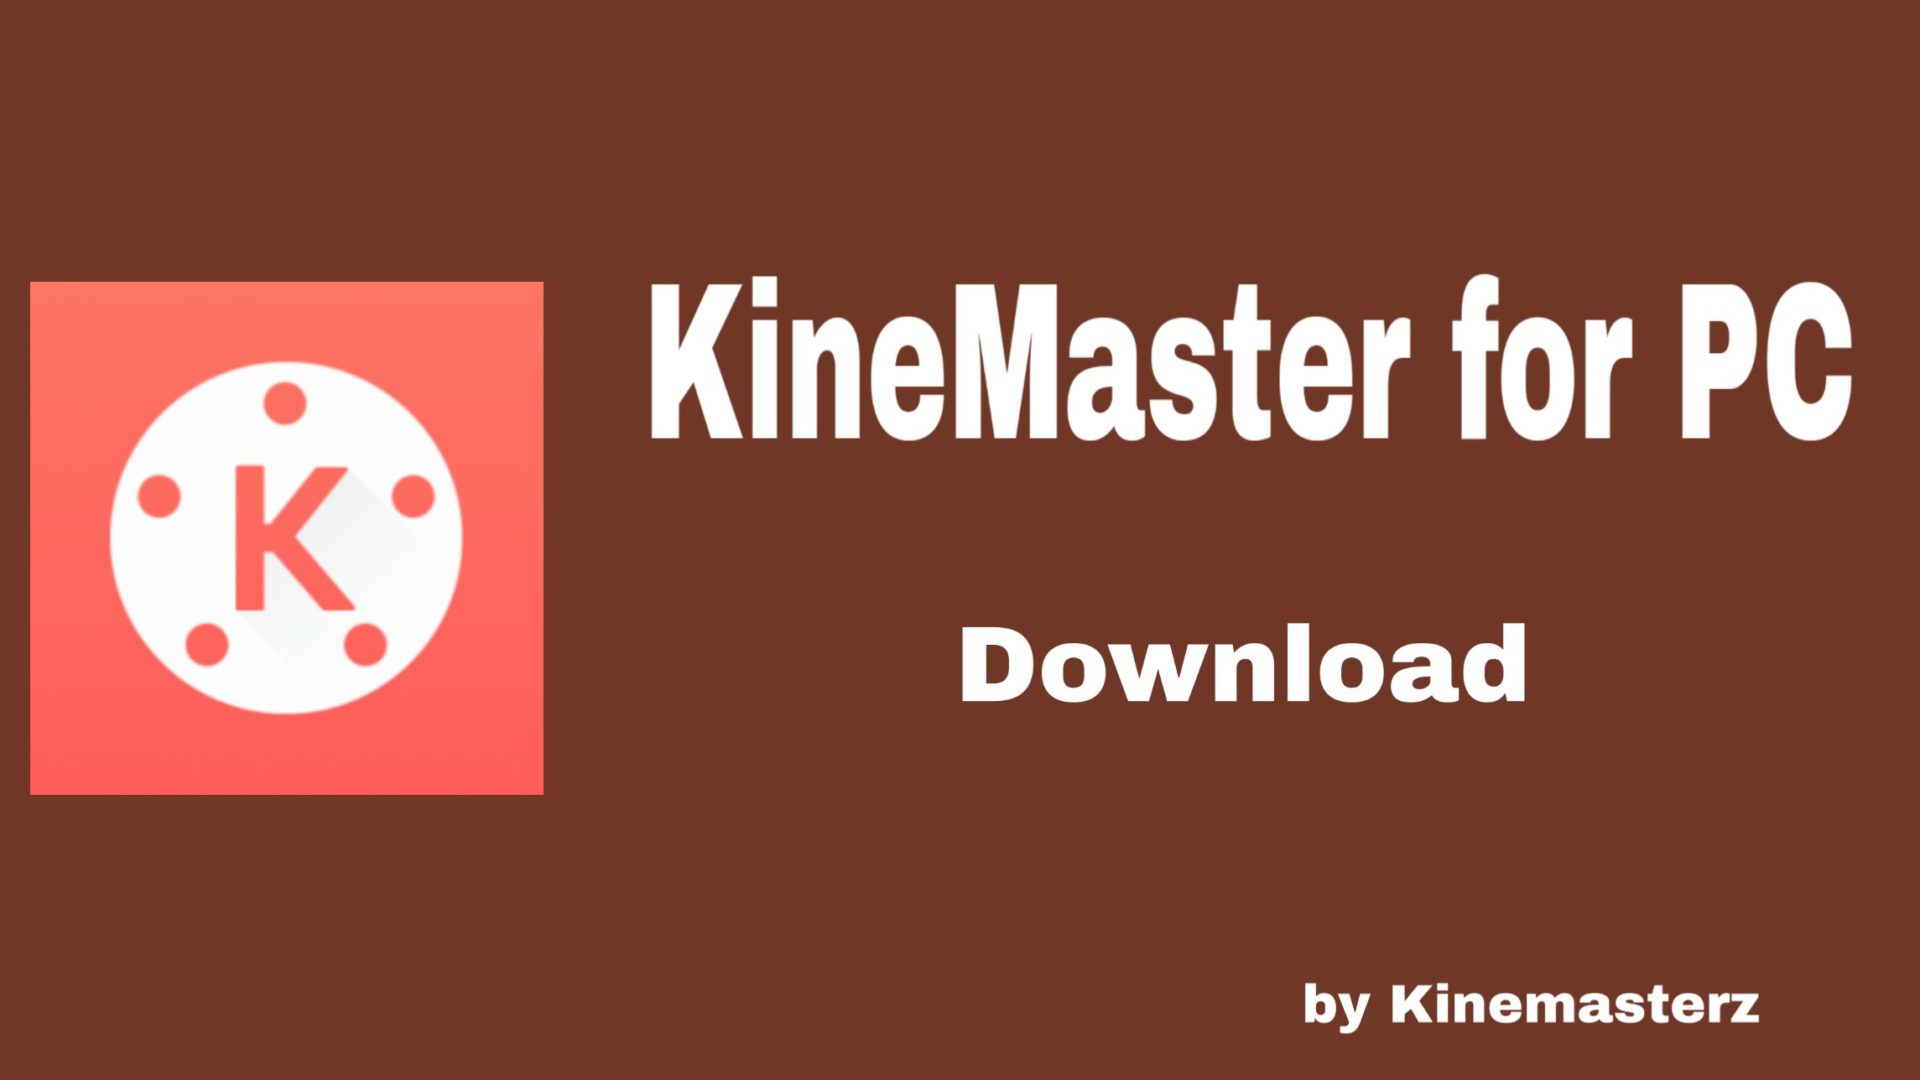 kinemaster pro download for pc windows 10